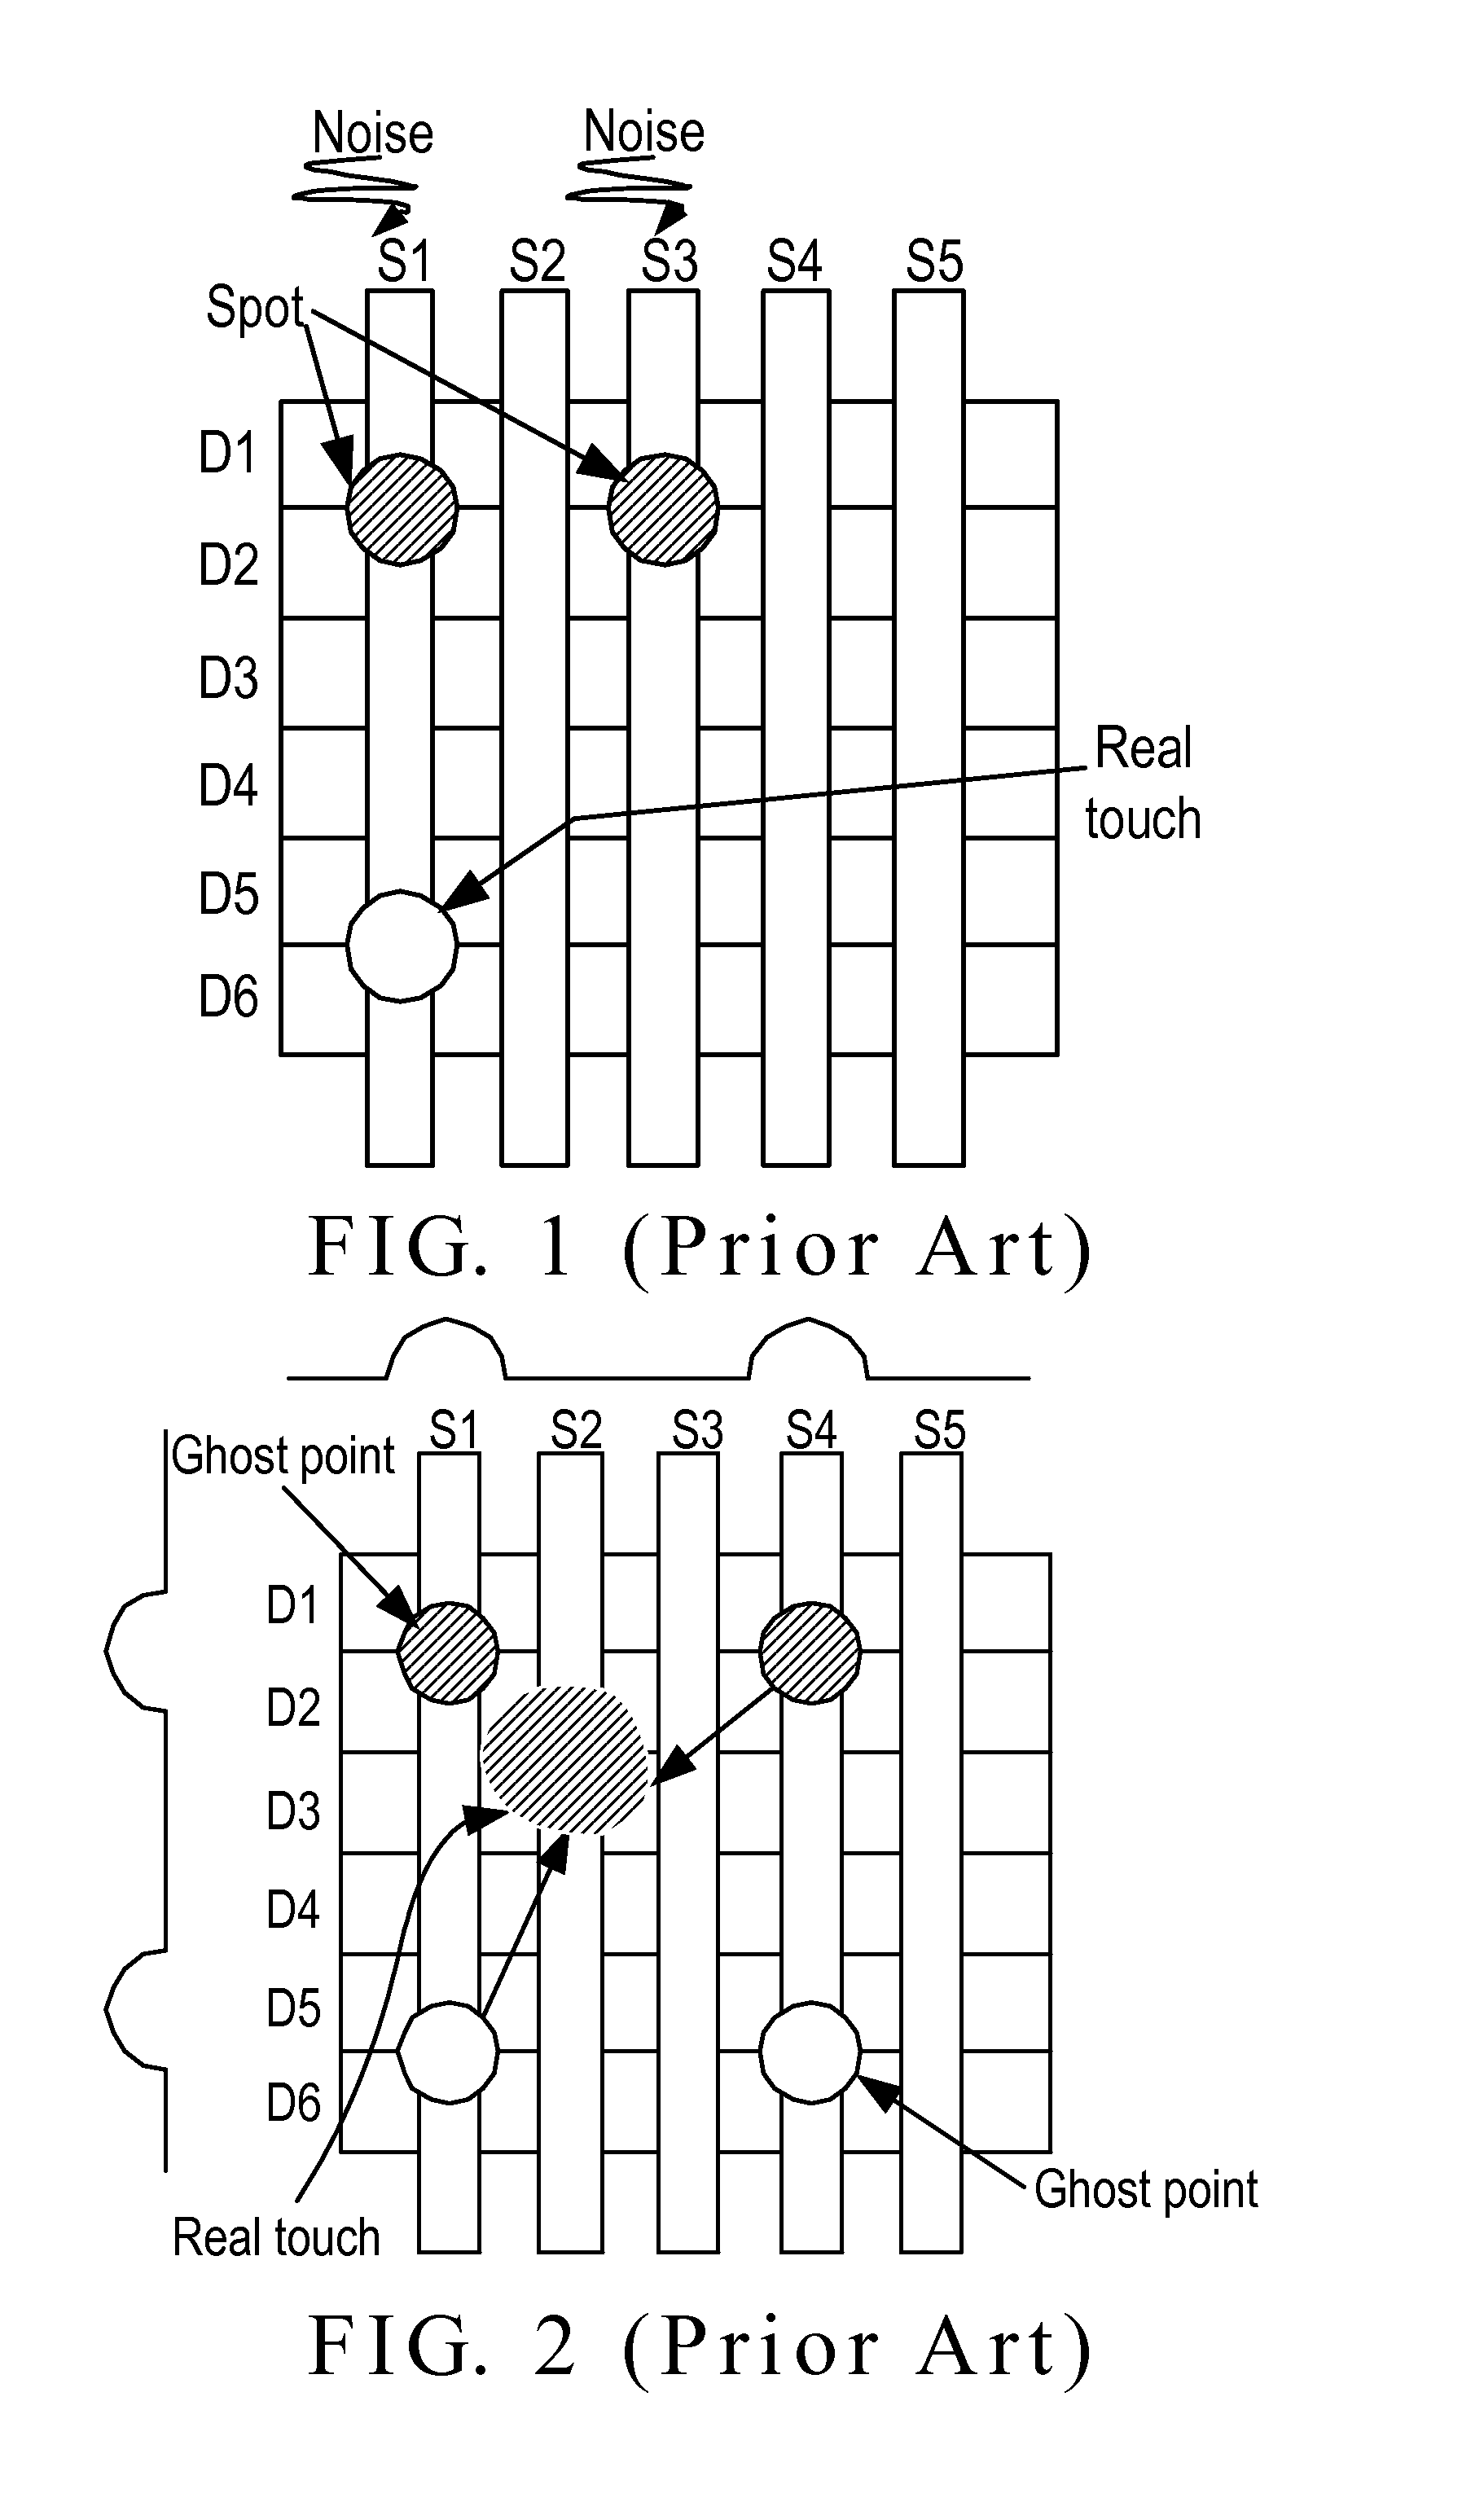 Sensing method using self-capacitance and mutual-capacitance alternatively to reduce touch noises